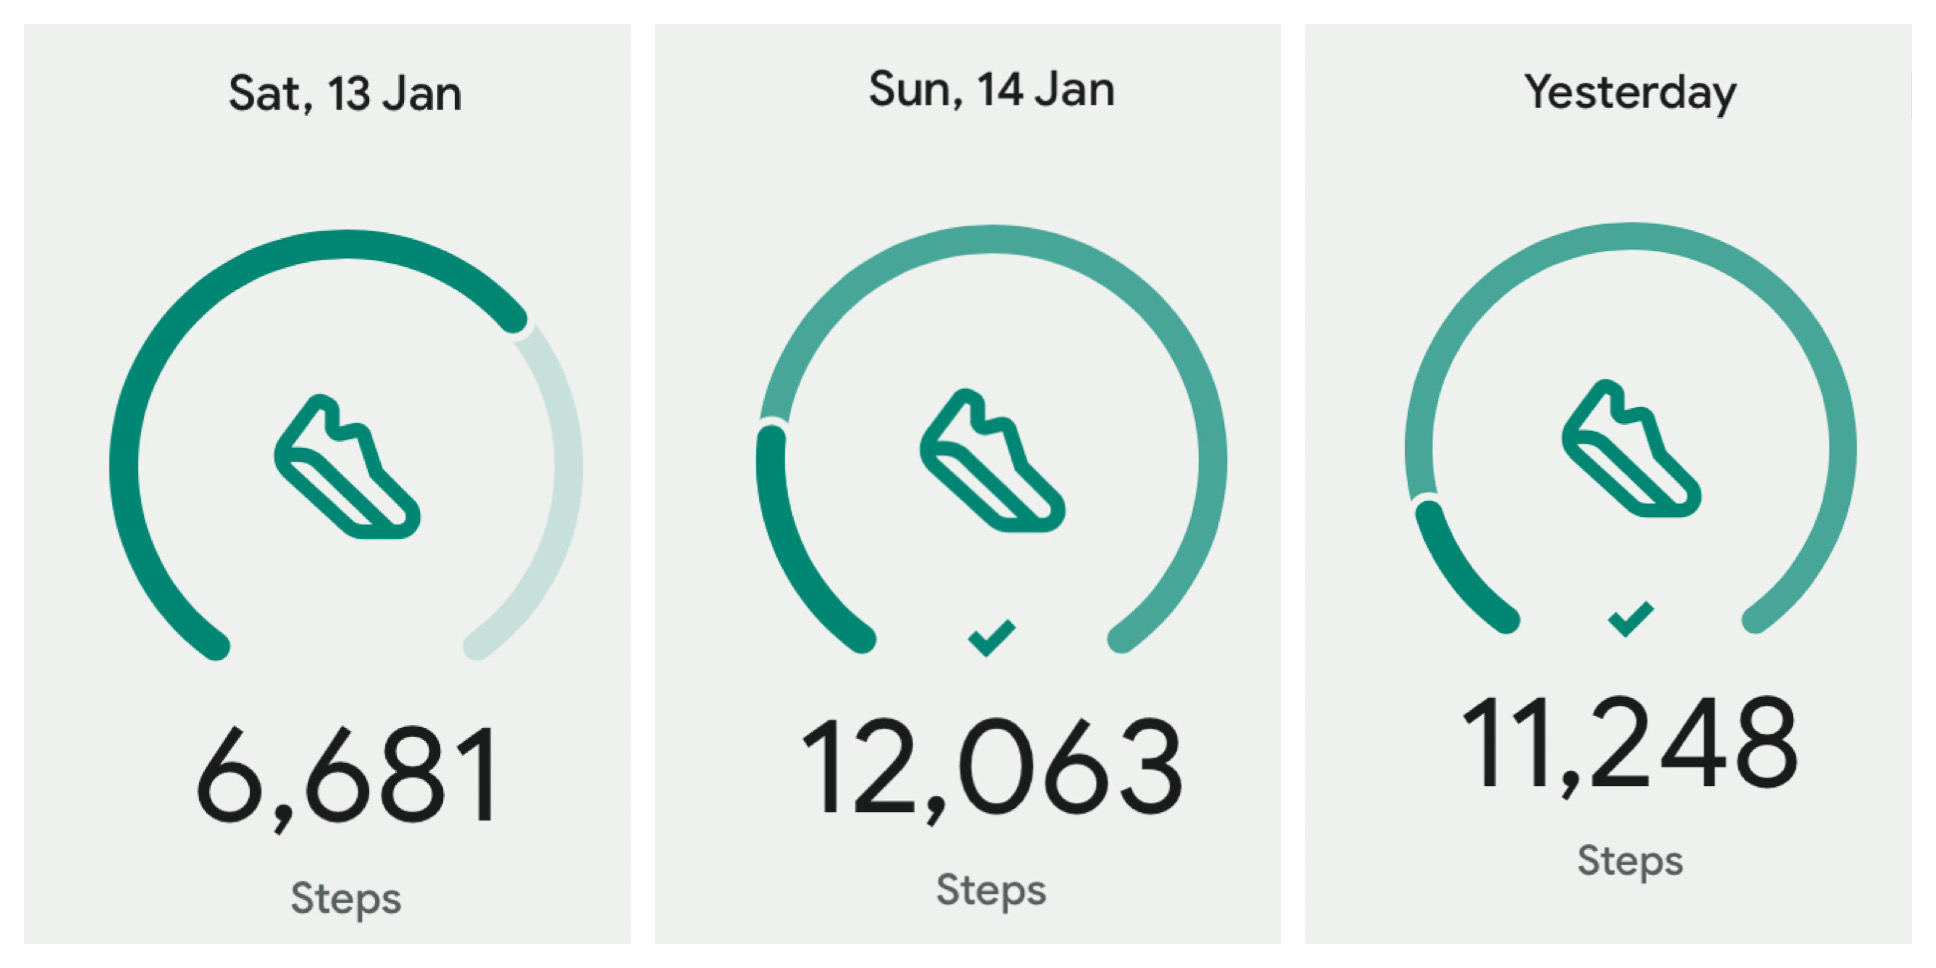 Three tiles showing three days of step counts for Fruday 13 January (6681), Saturday 14 January (12,063) and Sunday 15 January (11,248)